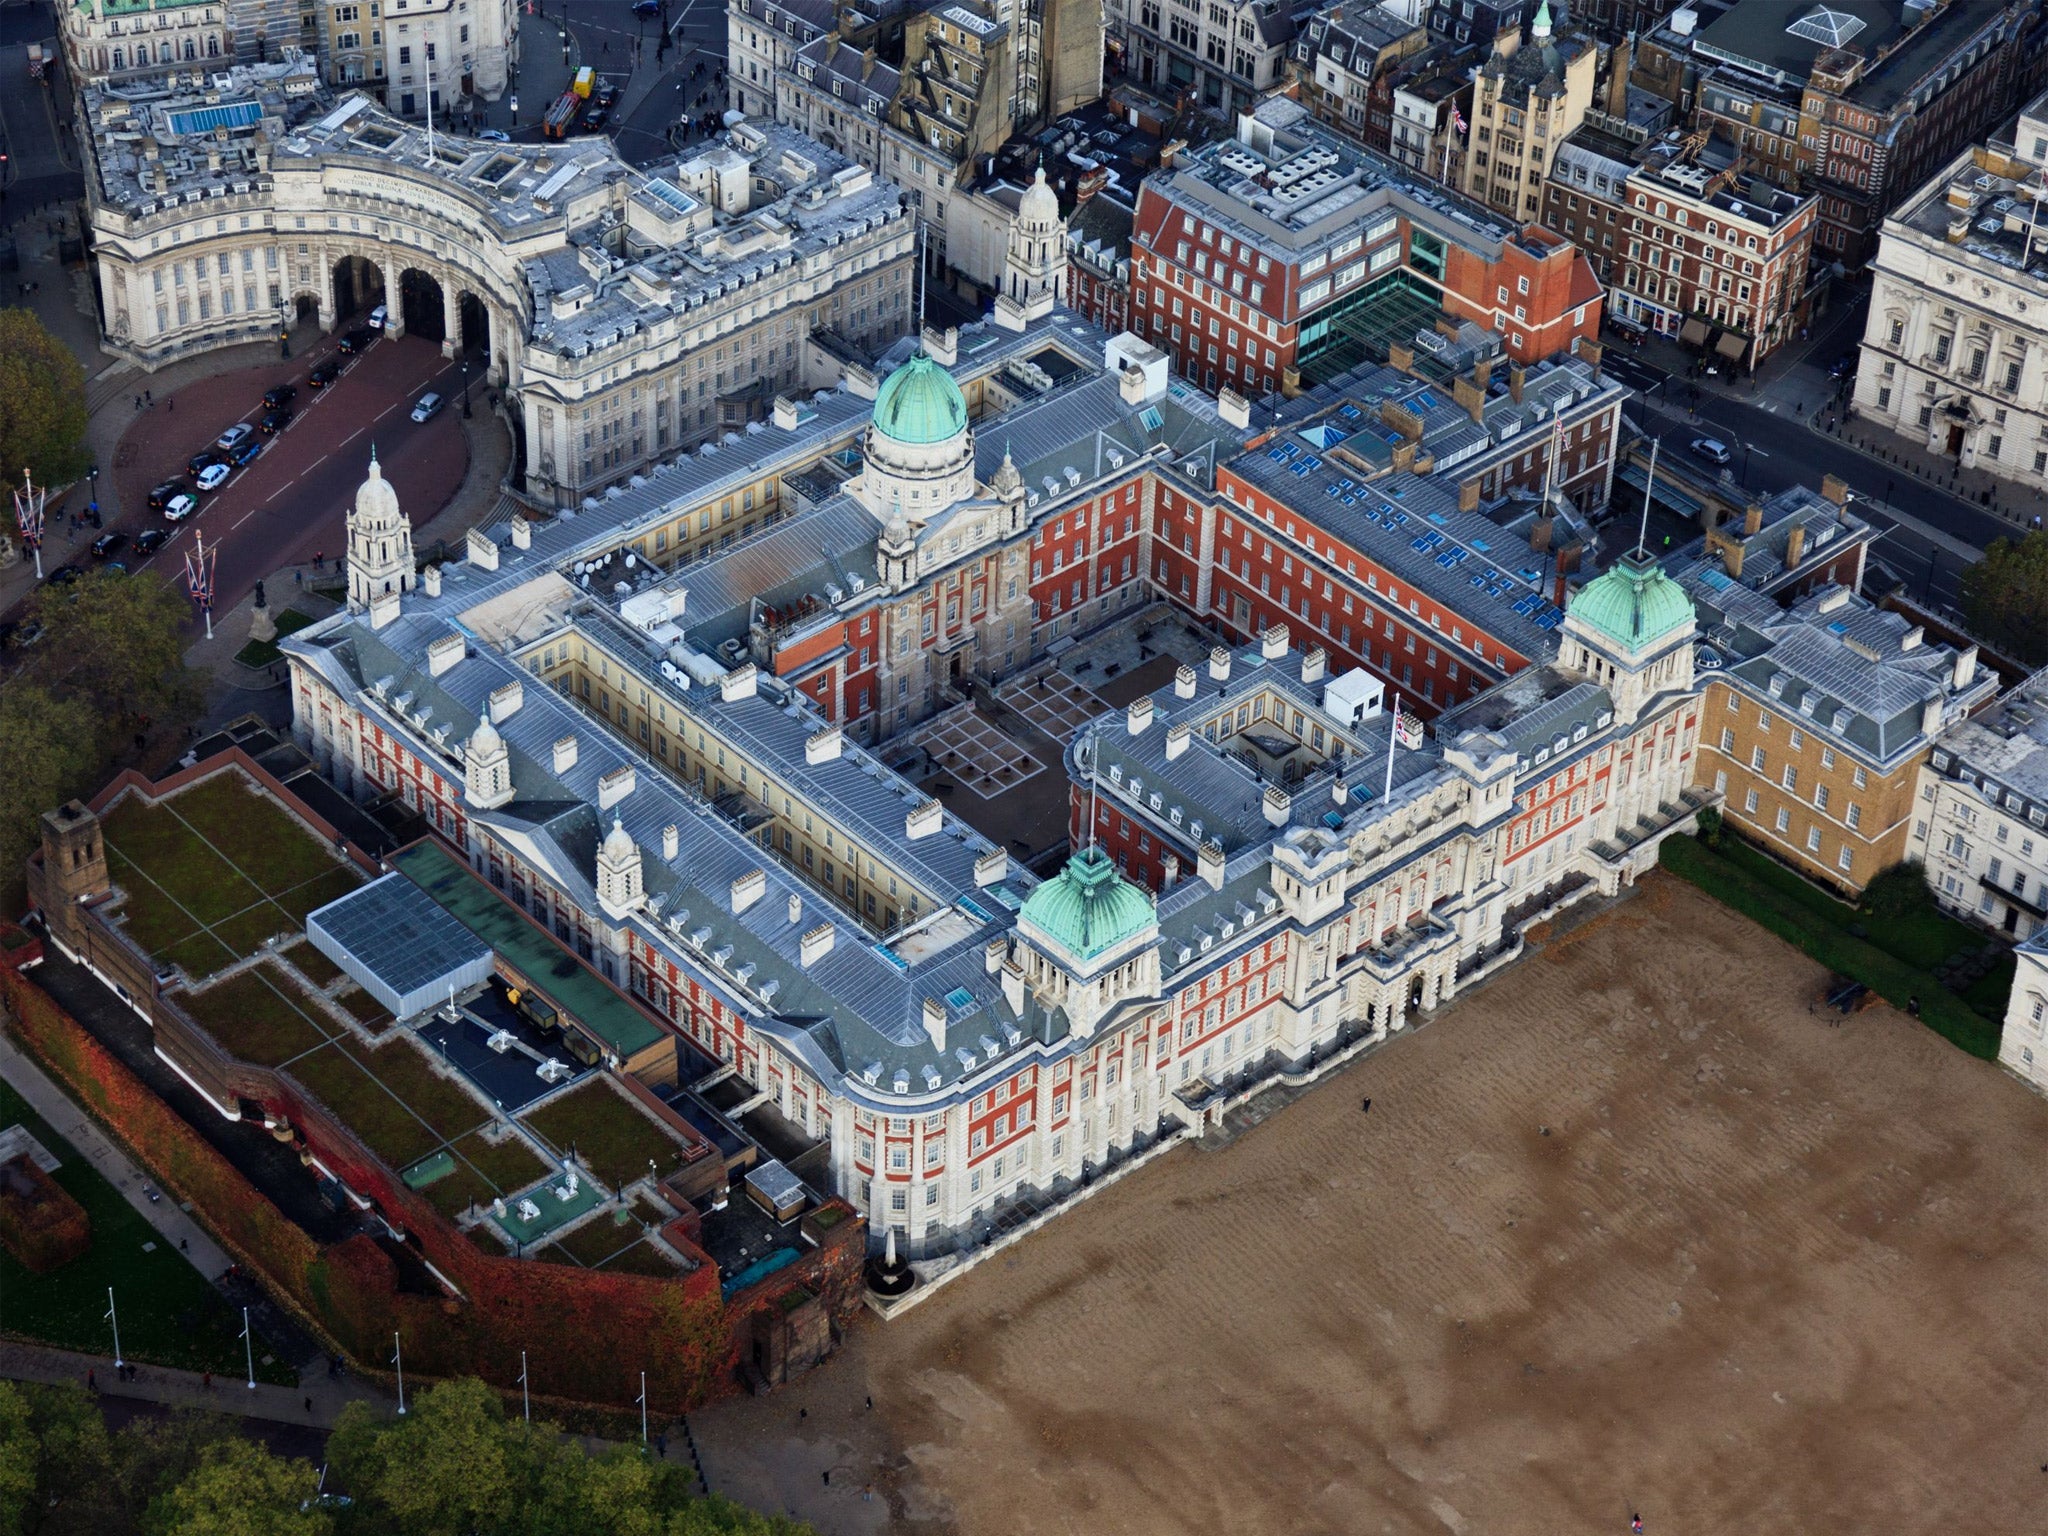 The Old Admiralty Building will be the Education Department’s new home after a £5m refit